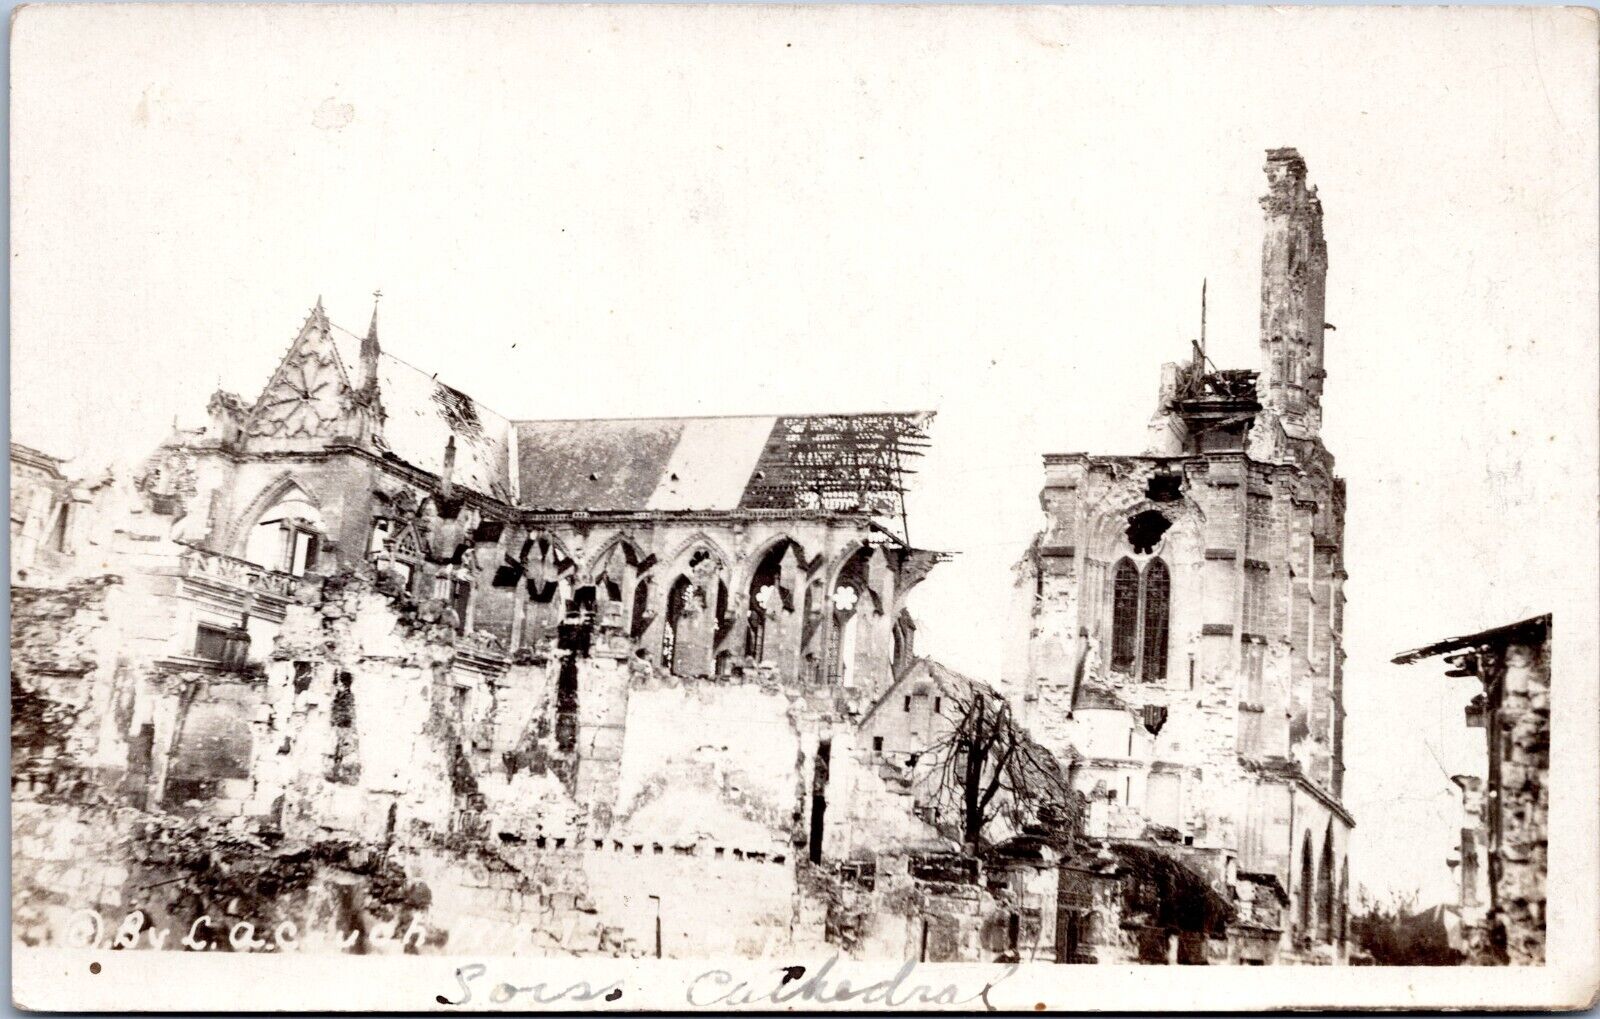 RPPC - Ruins of Soissons Cathedral, France - World War I - c1918 Photo Postcard